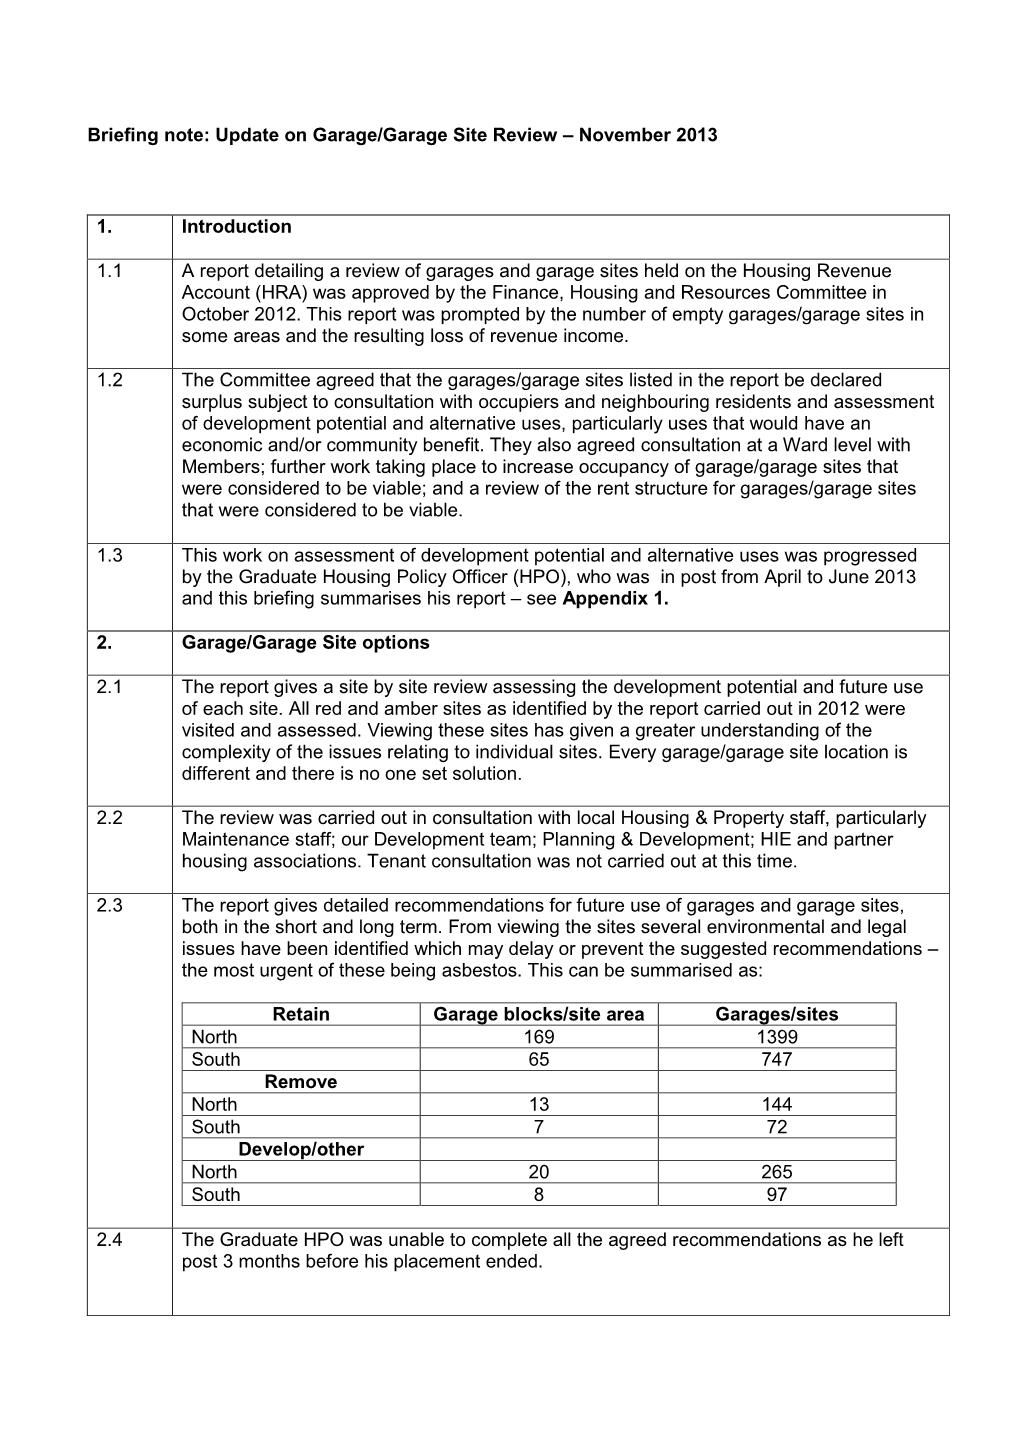 Briefing Note: Update on Garage/Garage Site Review – November 2013 1. Introduction 1.1 a Report Detailing a Review of Garages